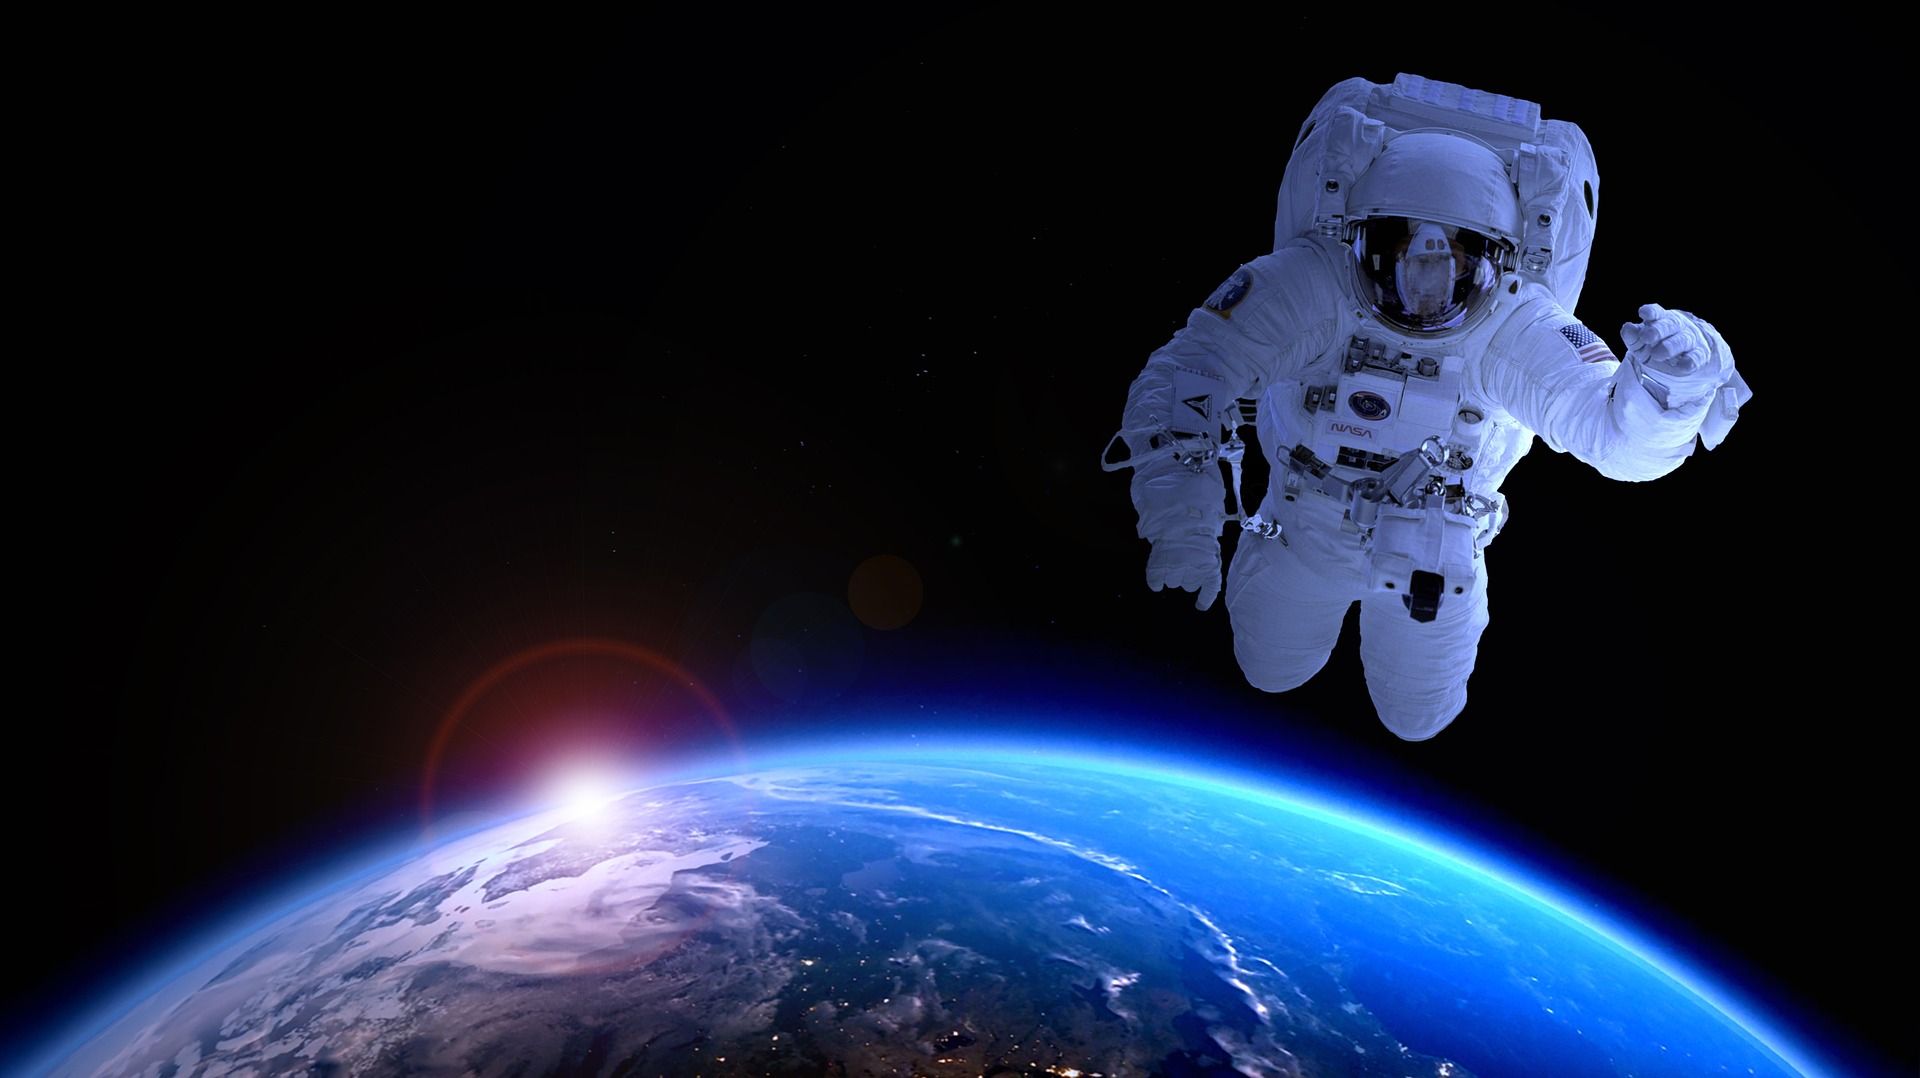 👨‍🚀 First commercial spacewalk could become reality this year